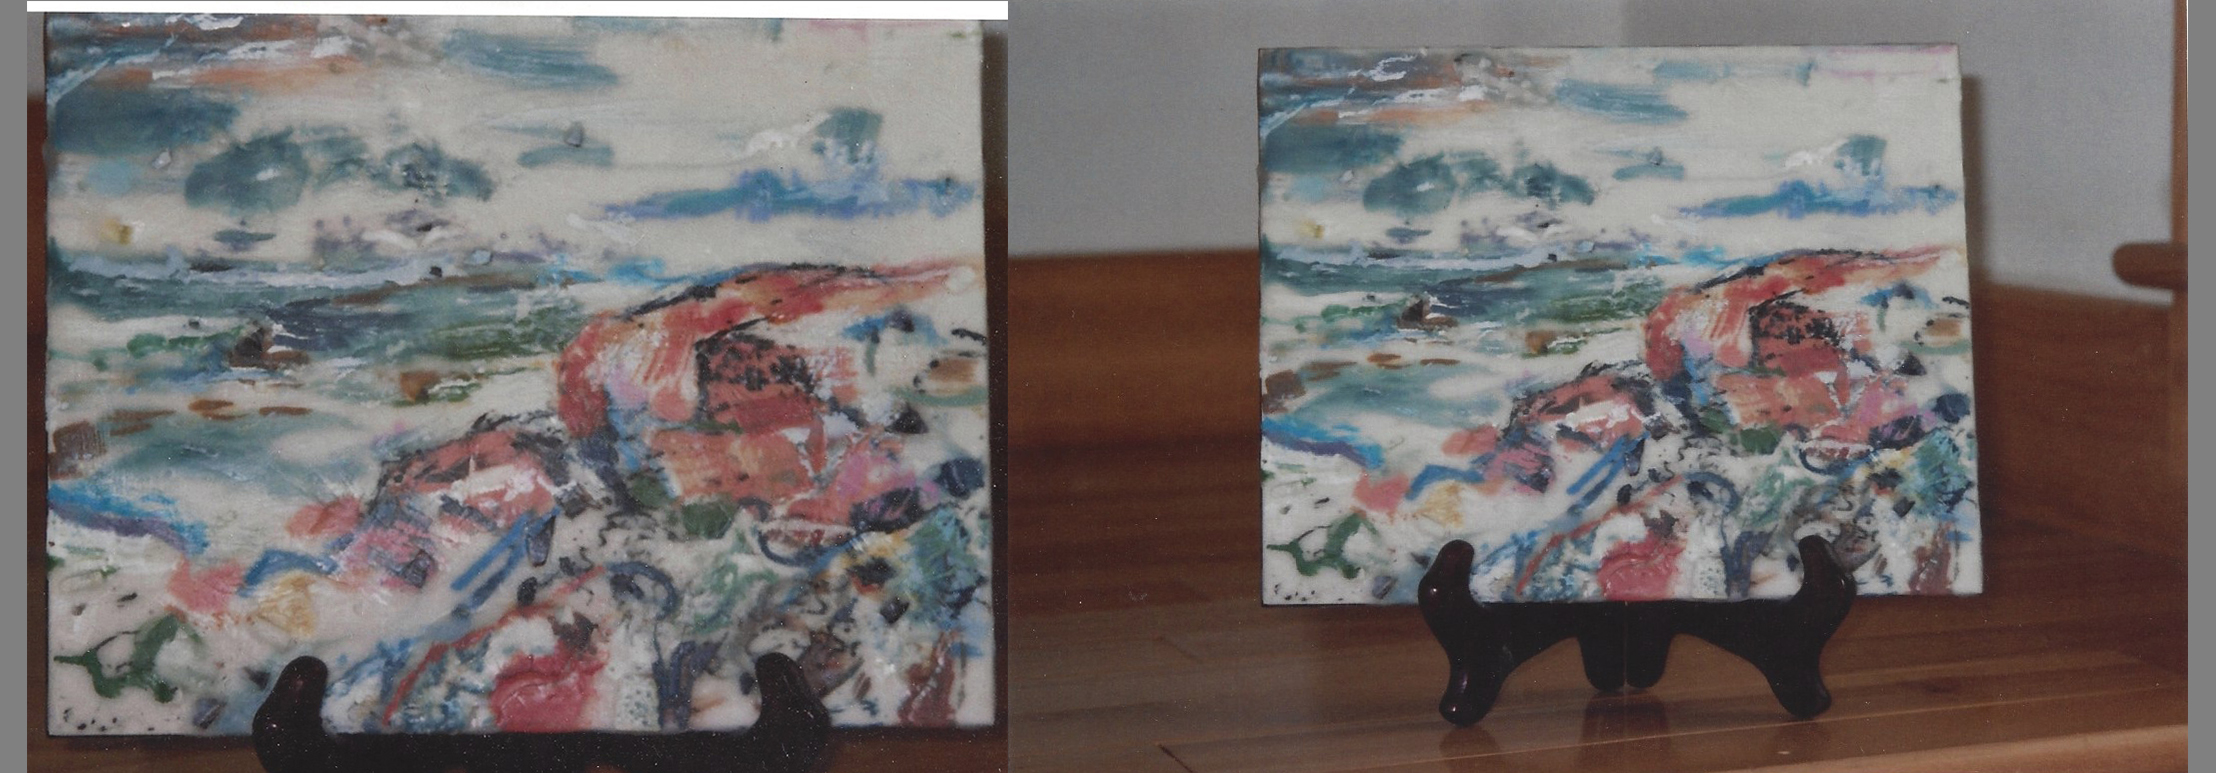 an encaustic painting in many vibrant colors, with a rose colored boulder at the edge of the ocean bay